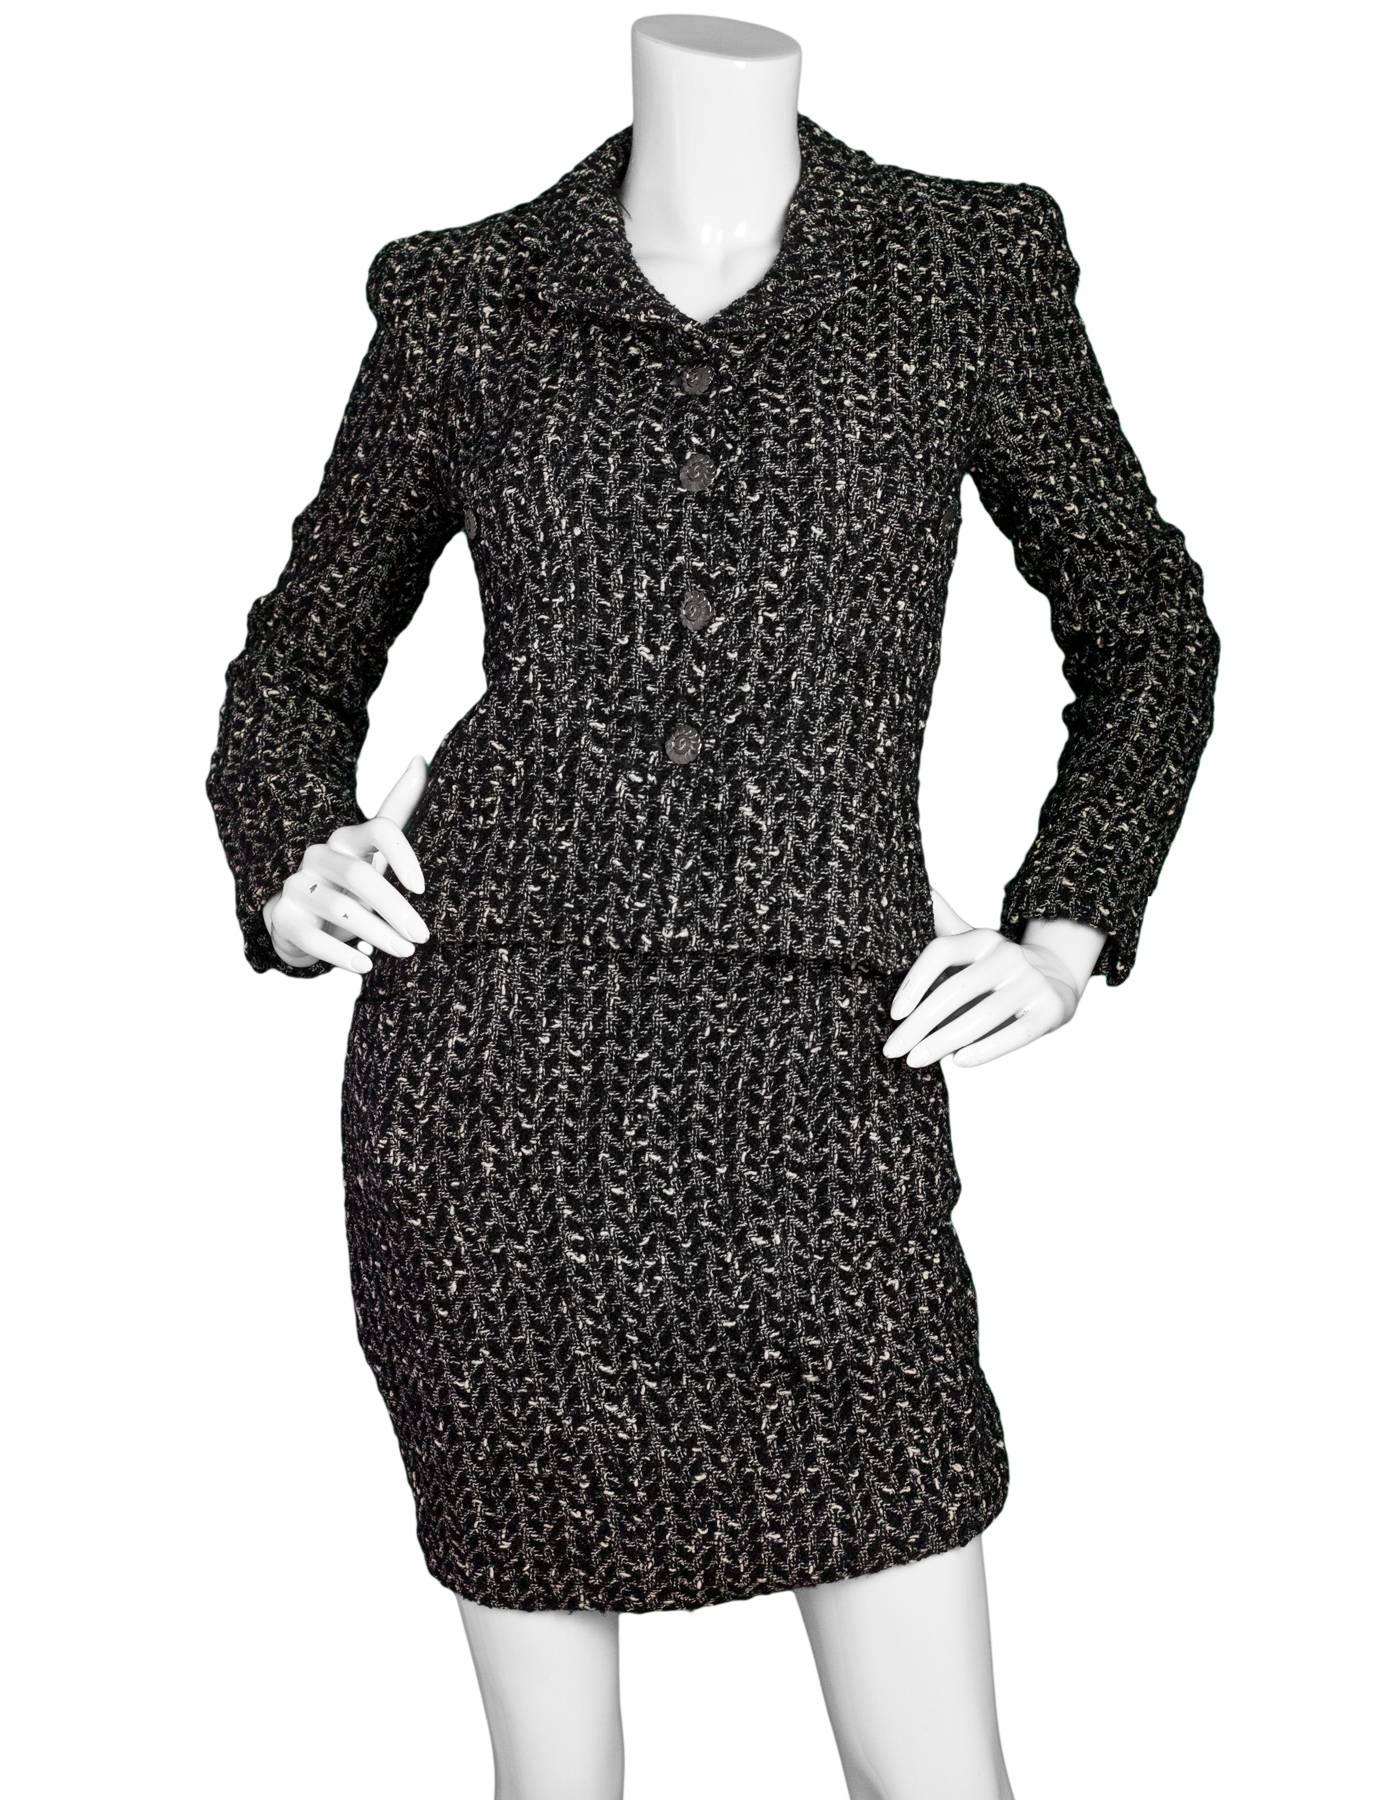 Chanel Black & White Wool Tweed Jacket Sz FR34

Made In: France
Year of Production: 1997
Color: Black, white
Composition: 93% wool, 7% nylon
Lining: Black 100% silk
Closure/opening: Front button closure
Exterior Pockets: Two front pockets
Interior